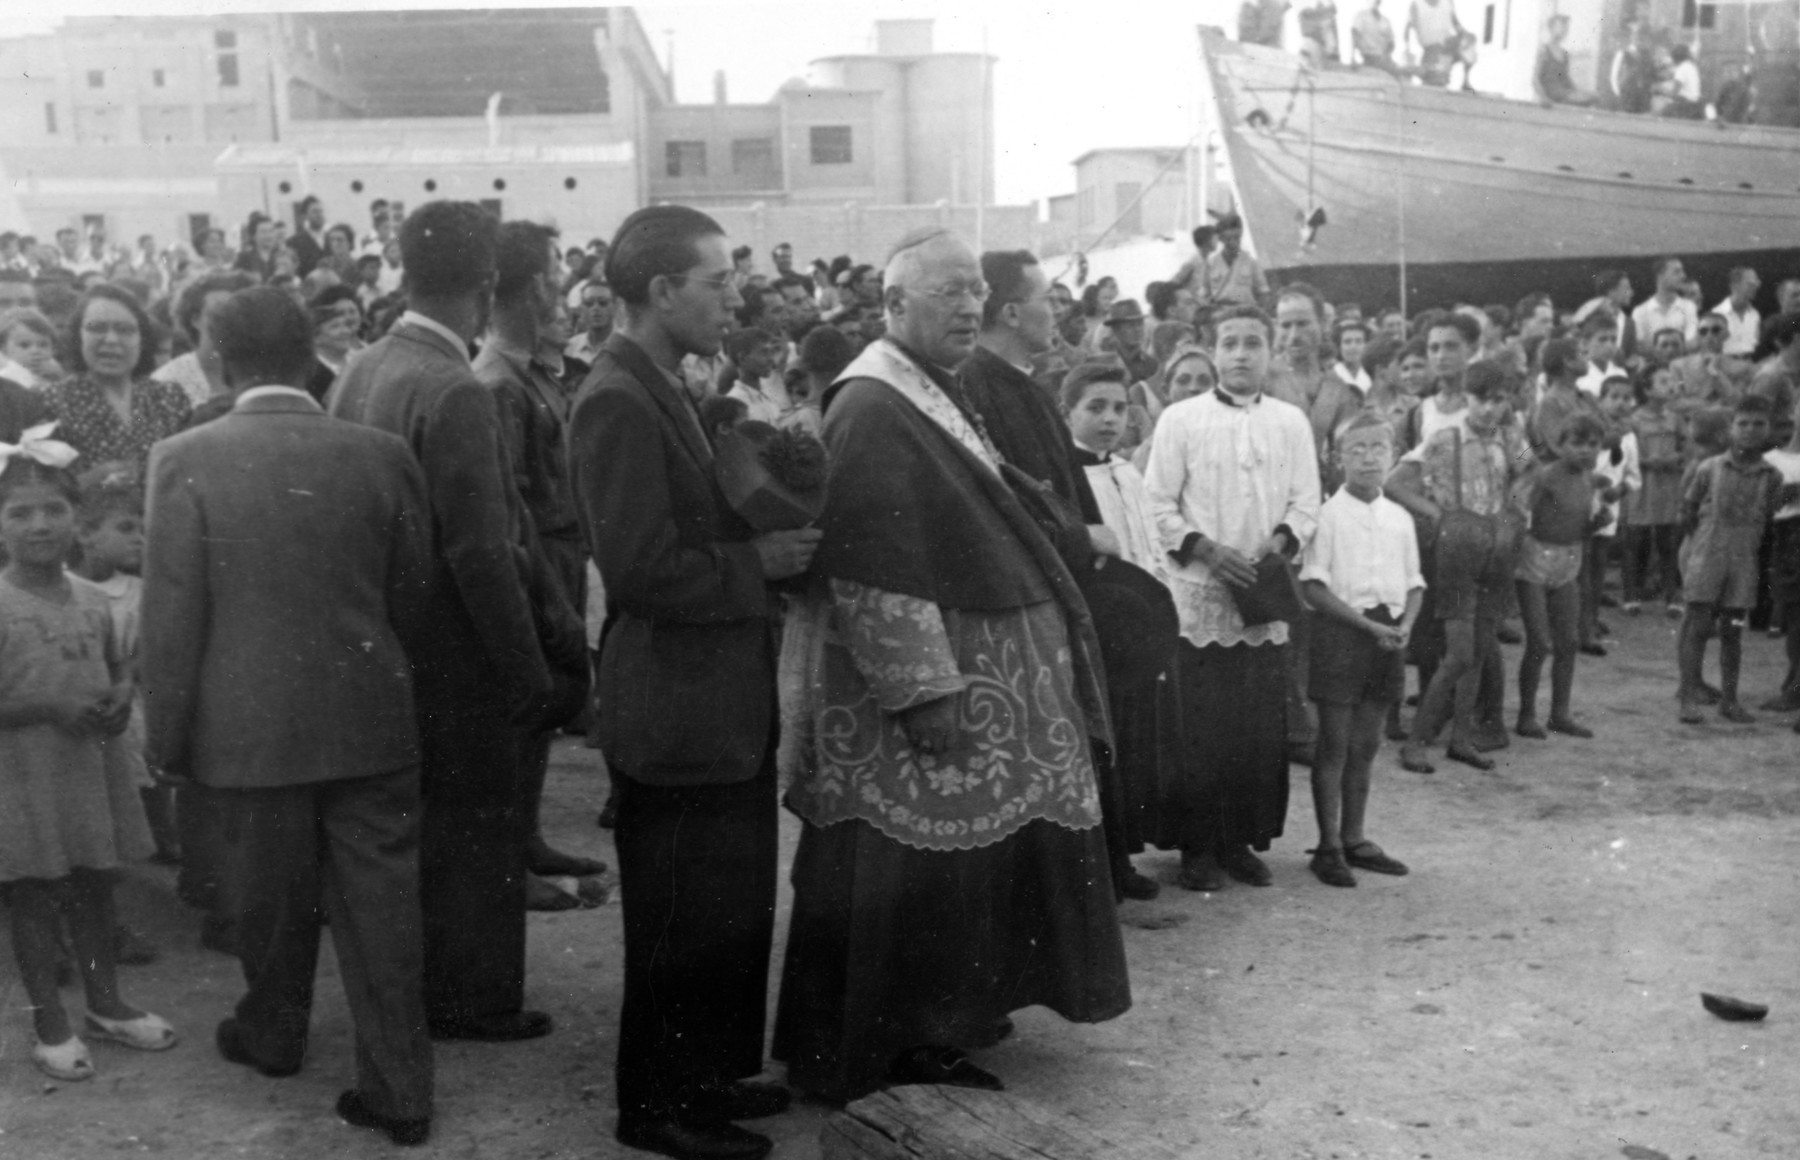 Italian priests bless the Dalin prior to its sailing from Monopoli to Palestine with 37 immigrants on board.